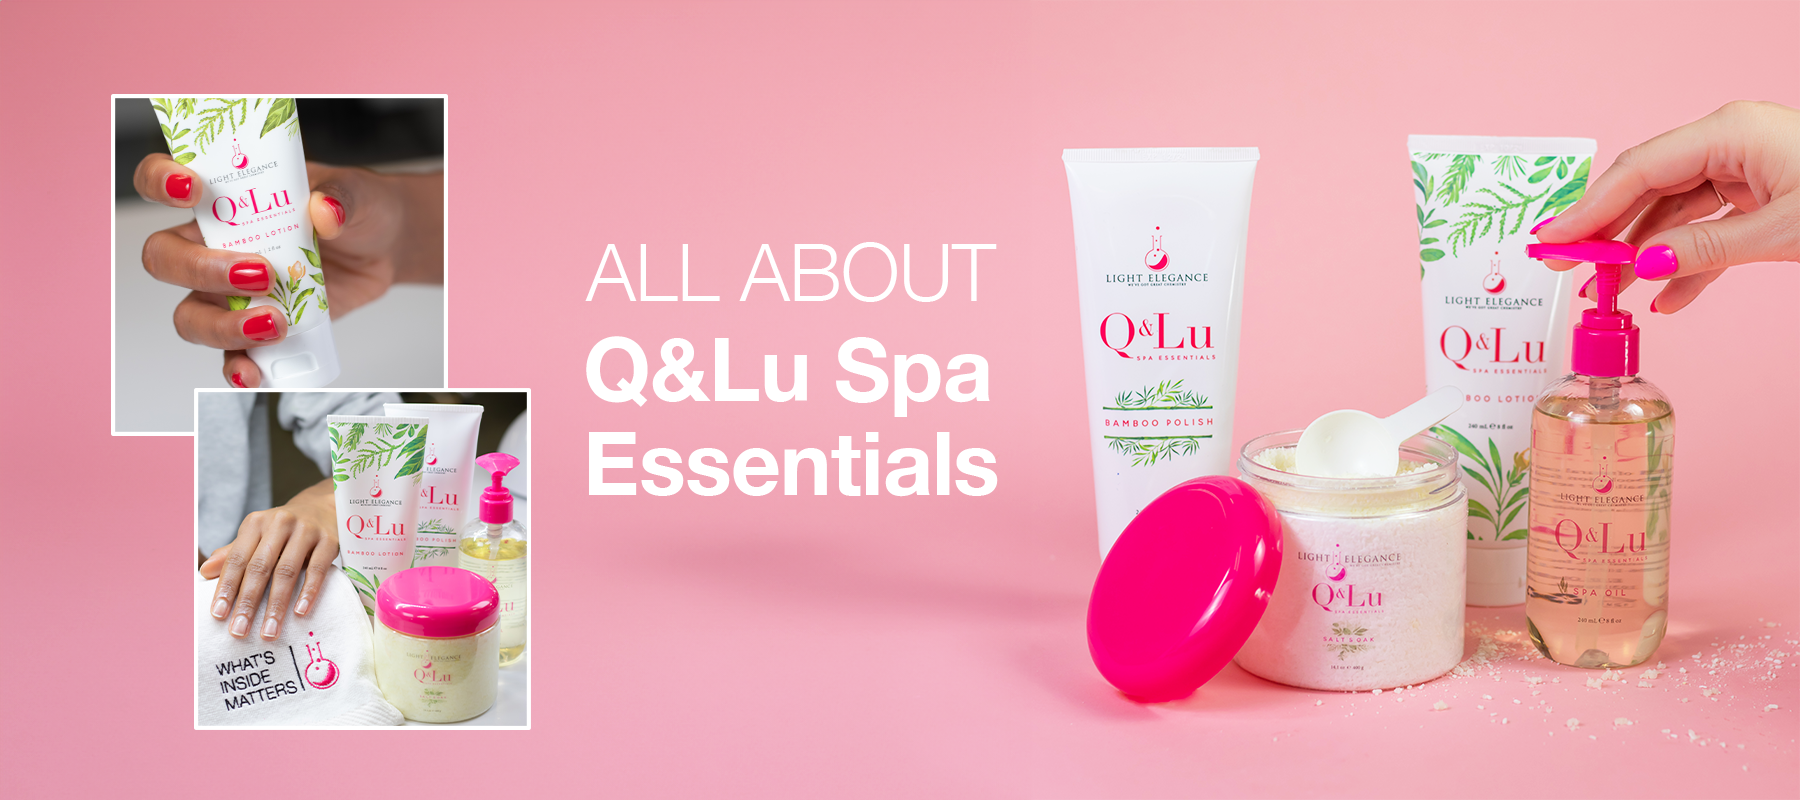 Get to know our Q&Lu Spa Essentials | All-Natural Skin Care | Spa & Pedicure Products | Award-Winning Spa Line